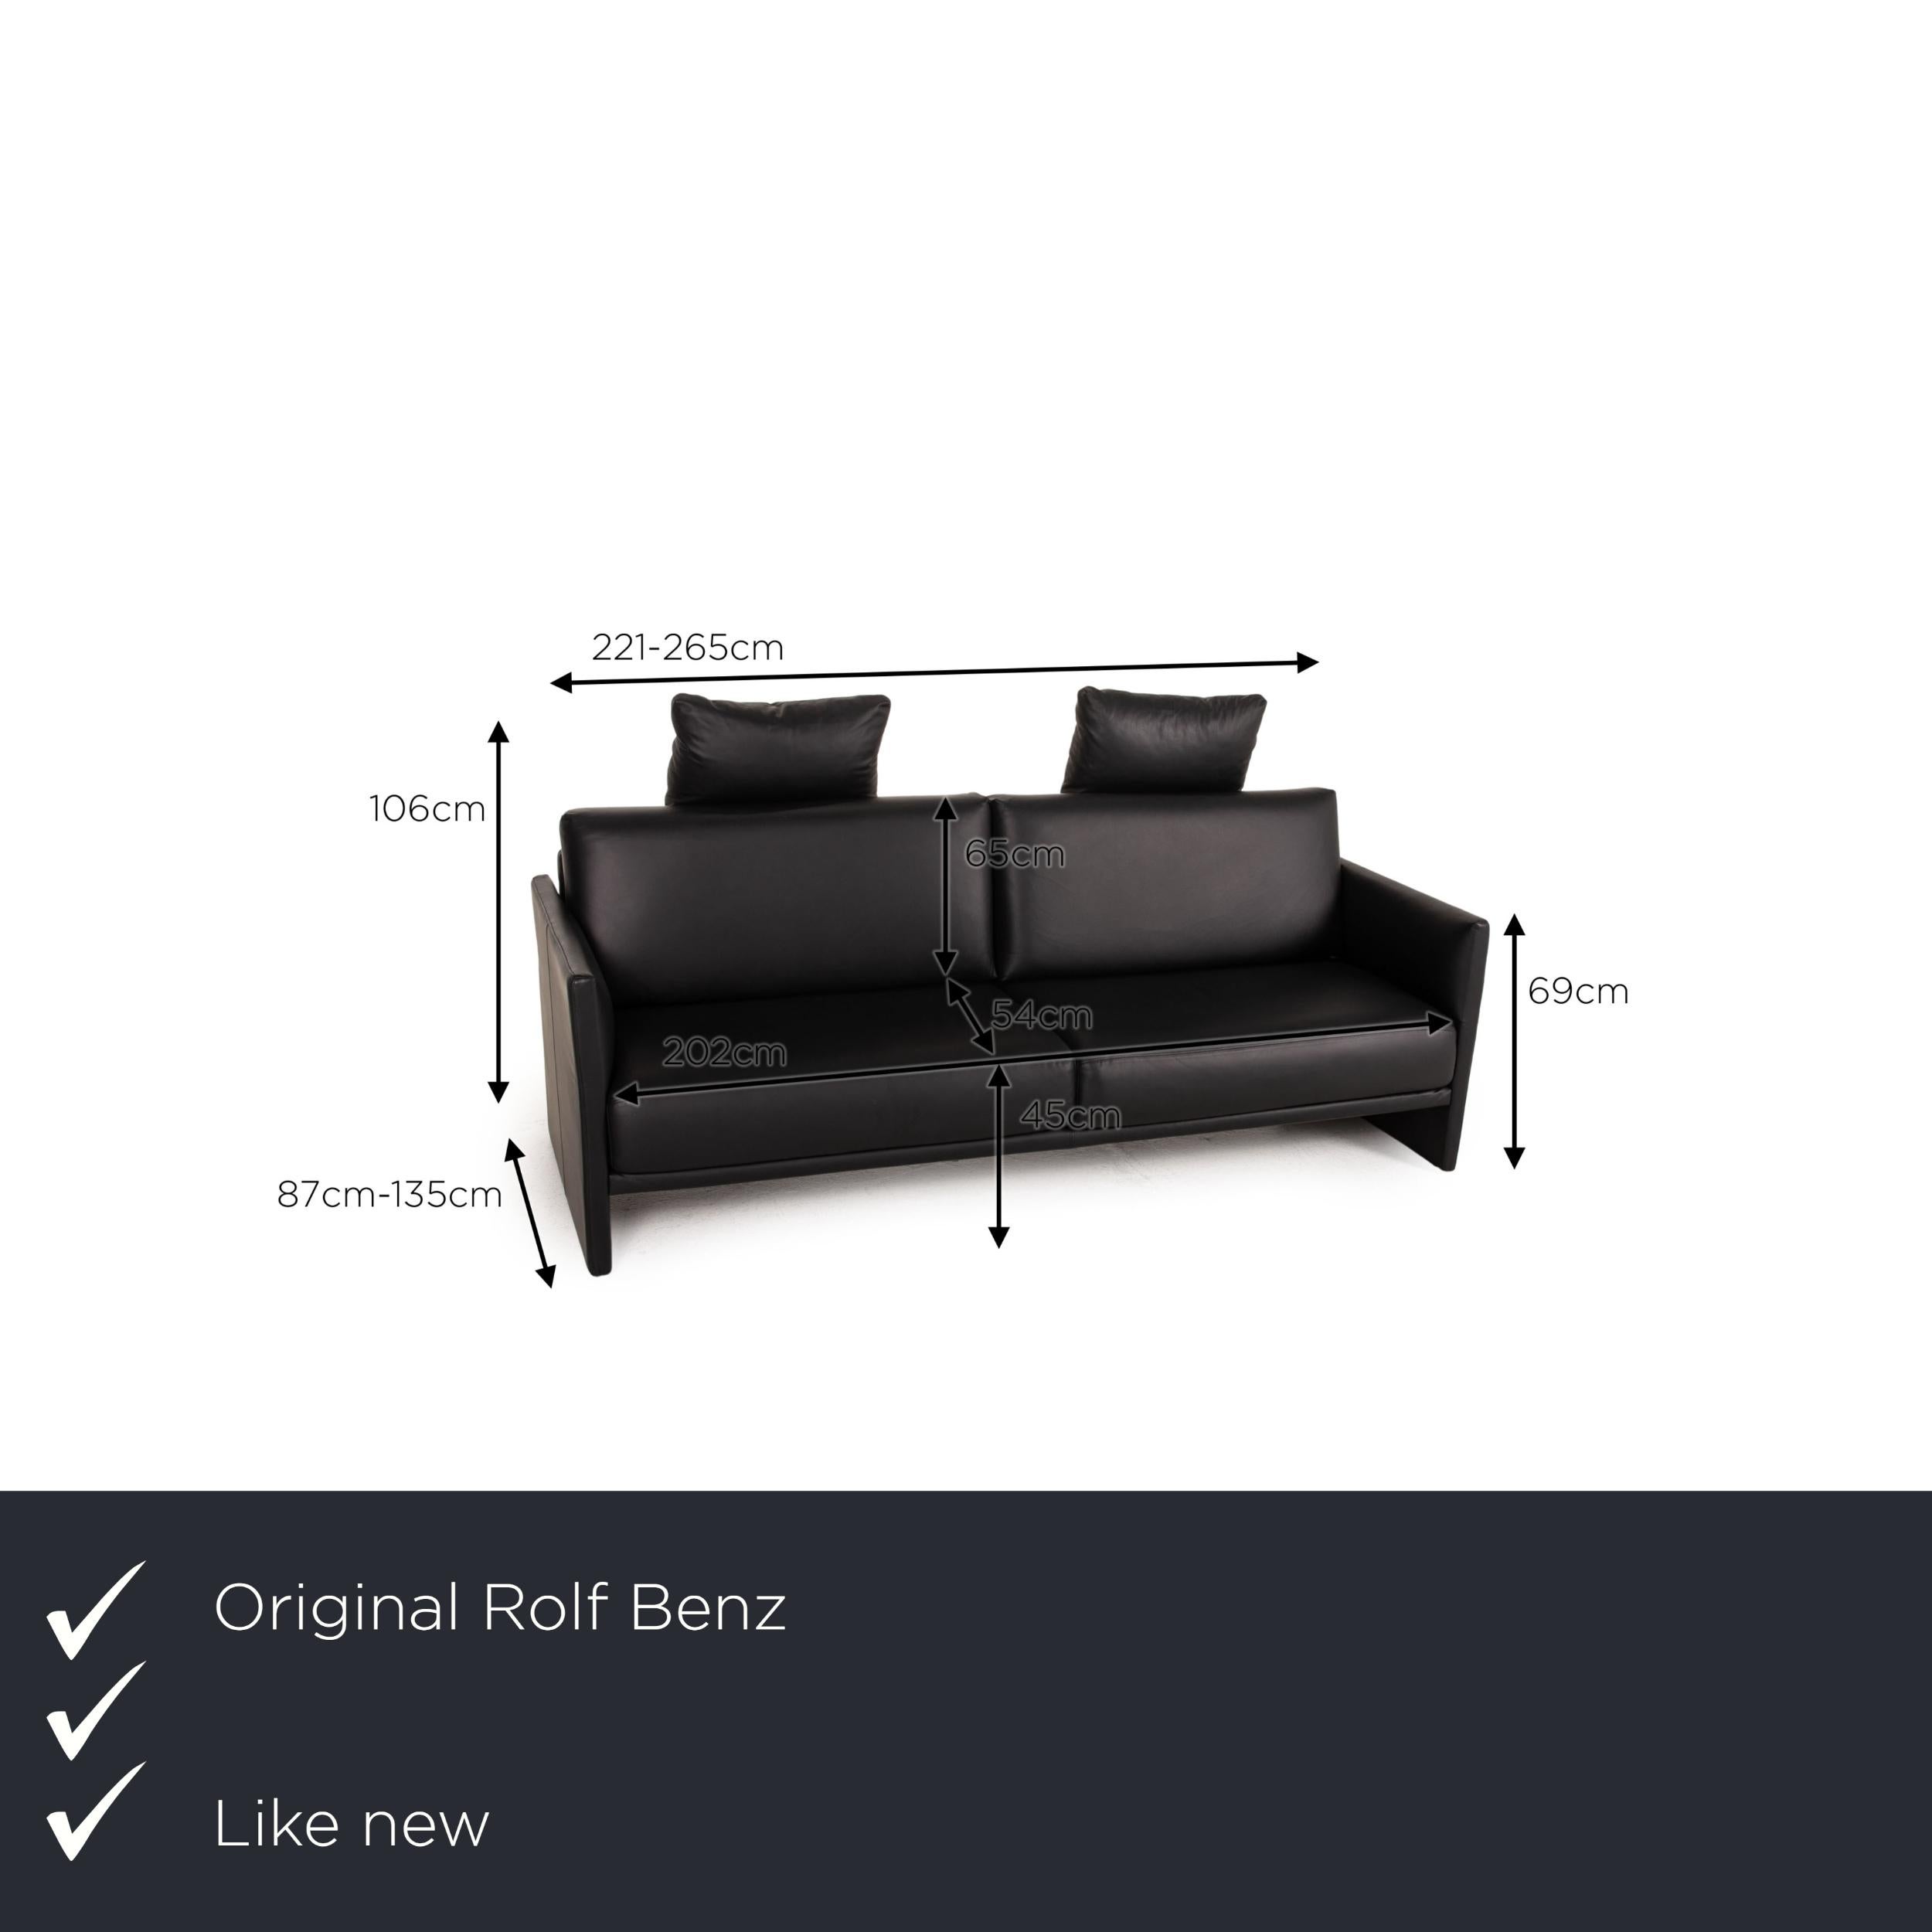 We present to you a Rolf Benz Cara leather sofa black three-seater function couch.


 Product measurements in centimeters:
 

Depth: 87
Width: 221
Height: 106
Seat height: 45
Rest height: 69
Seat depth: 54
Seat width: 202
Back height: